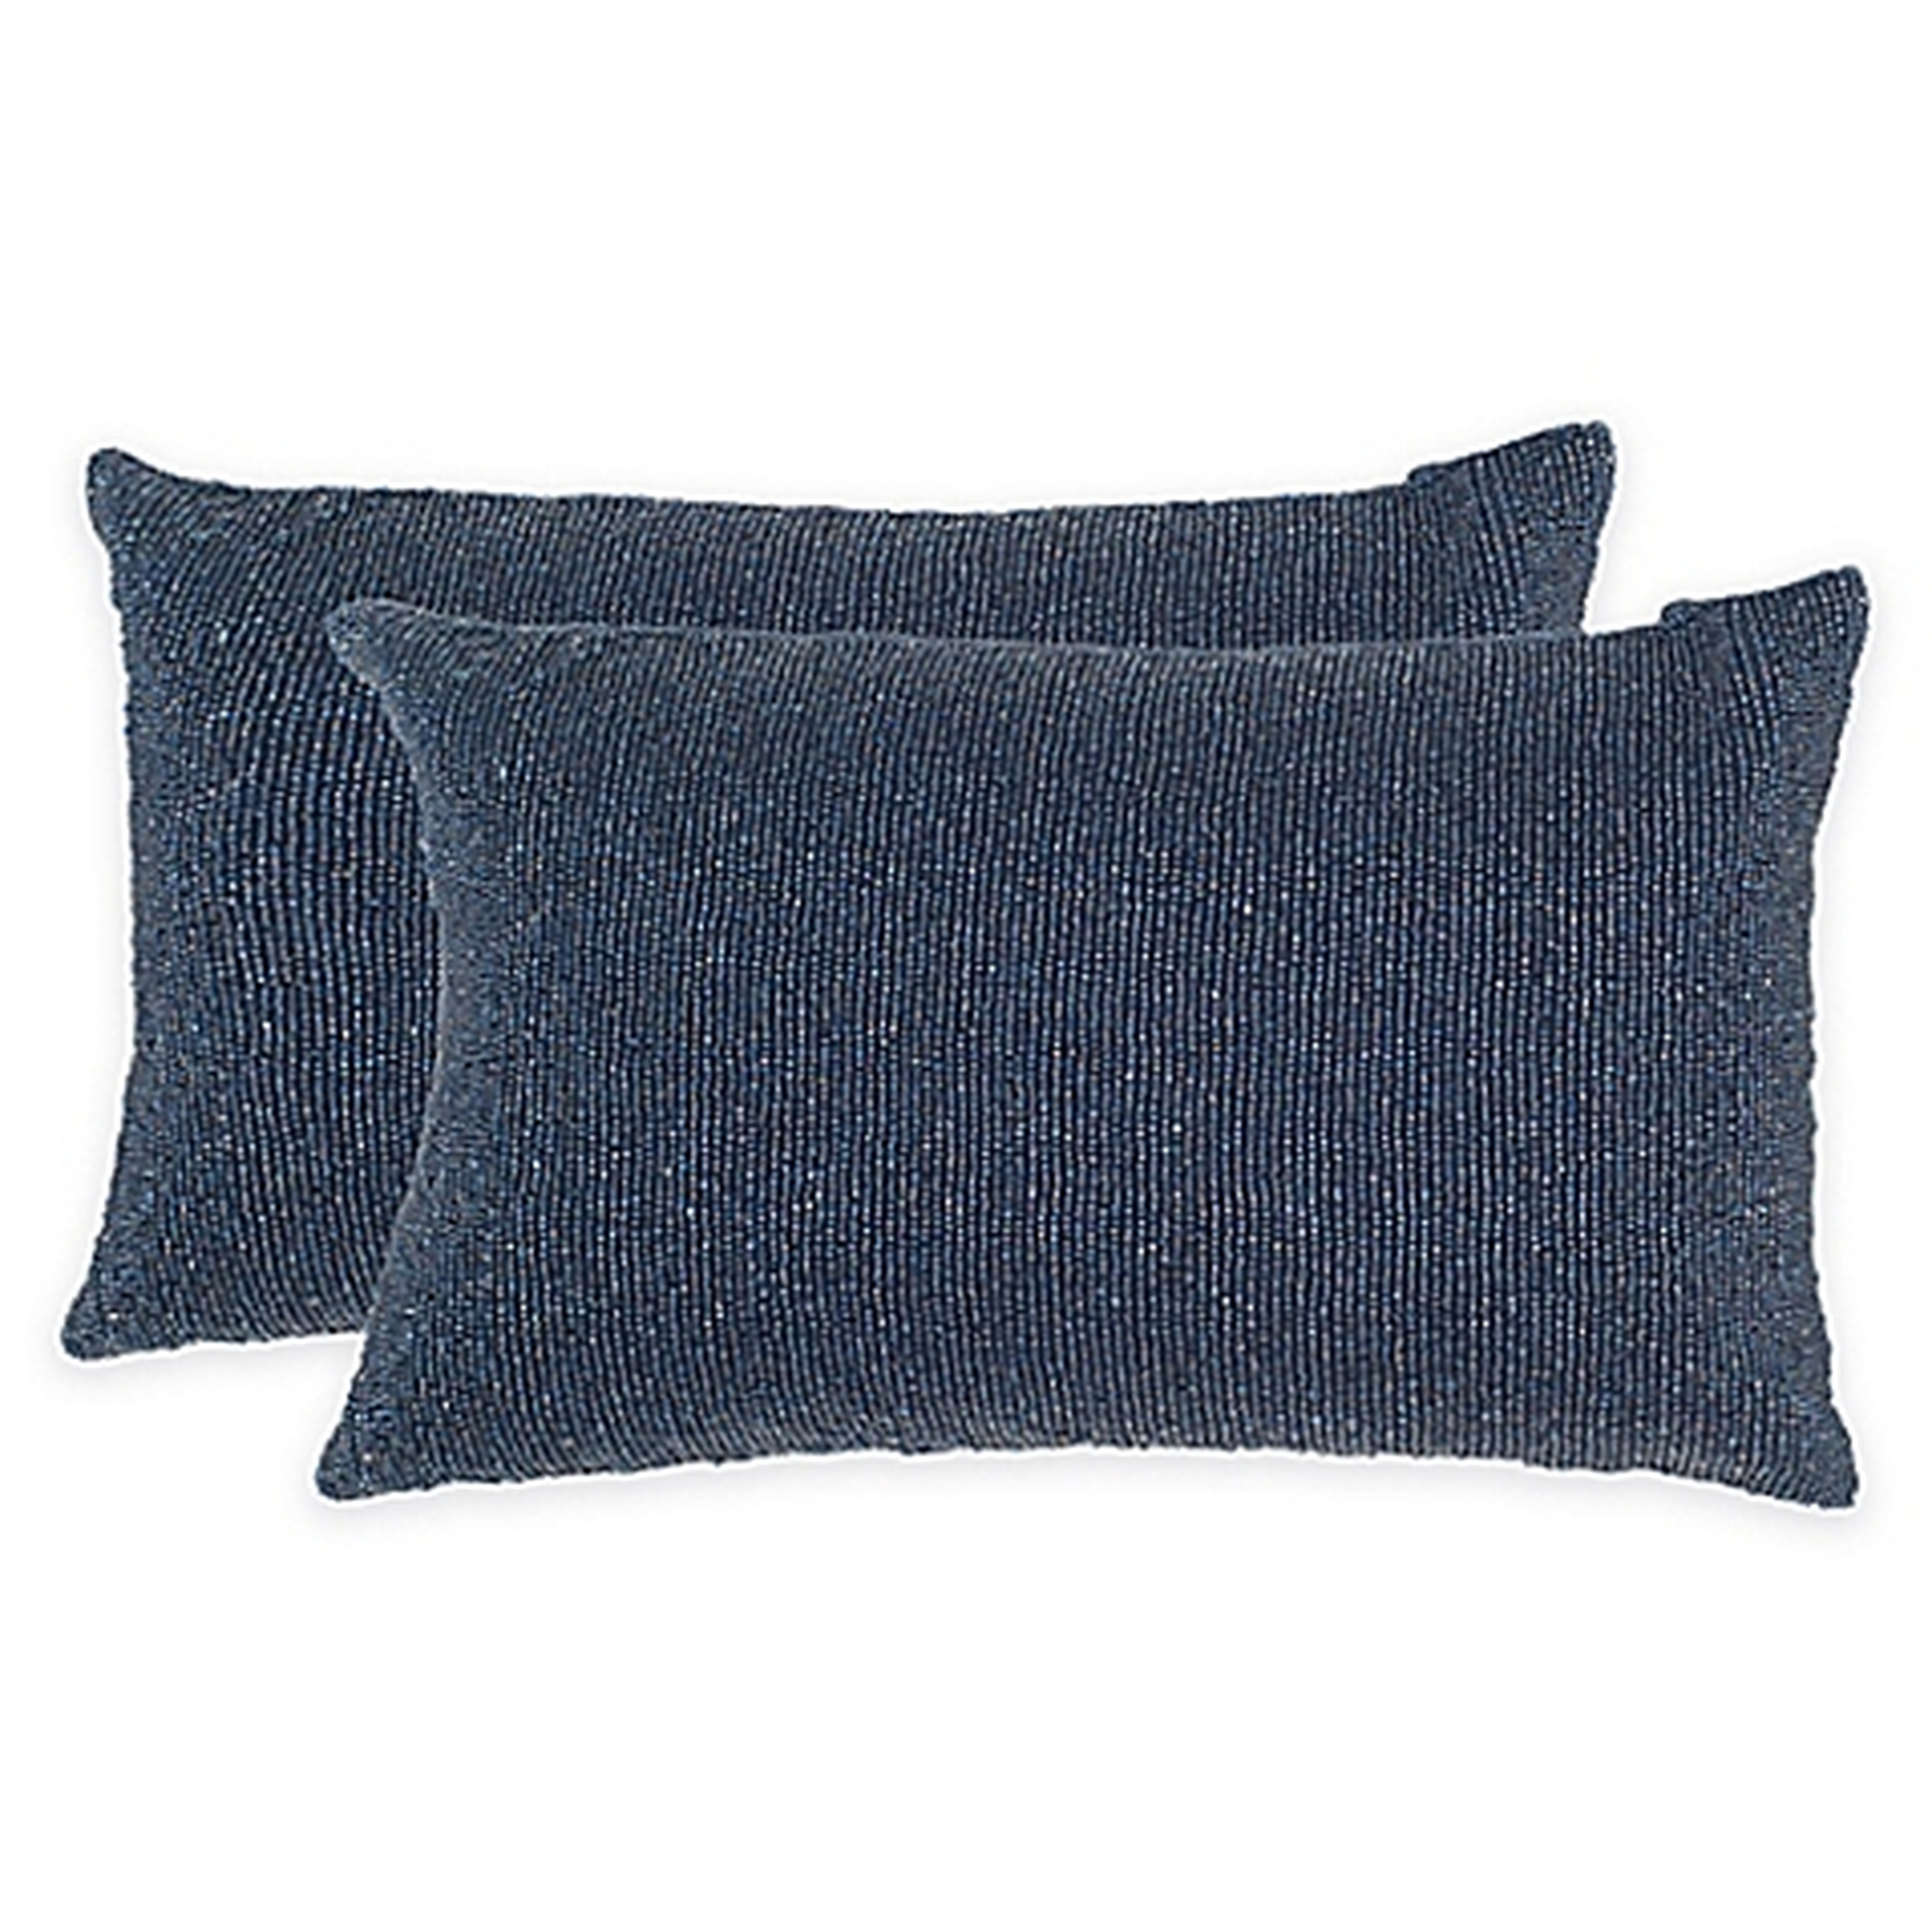 Essence Throw Pillow in Midnight Navy (Set of 2) - Arlo Home